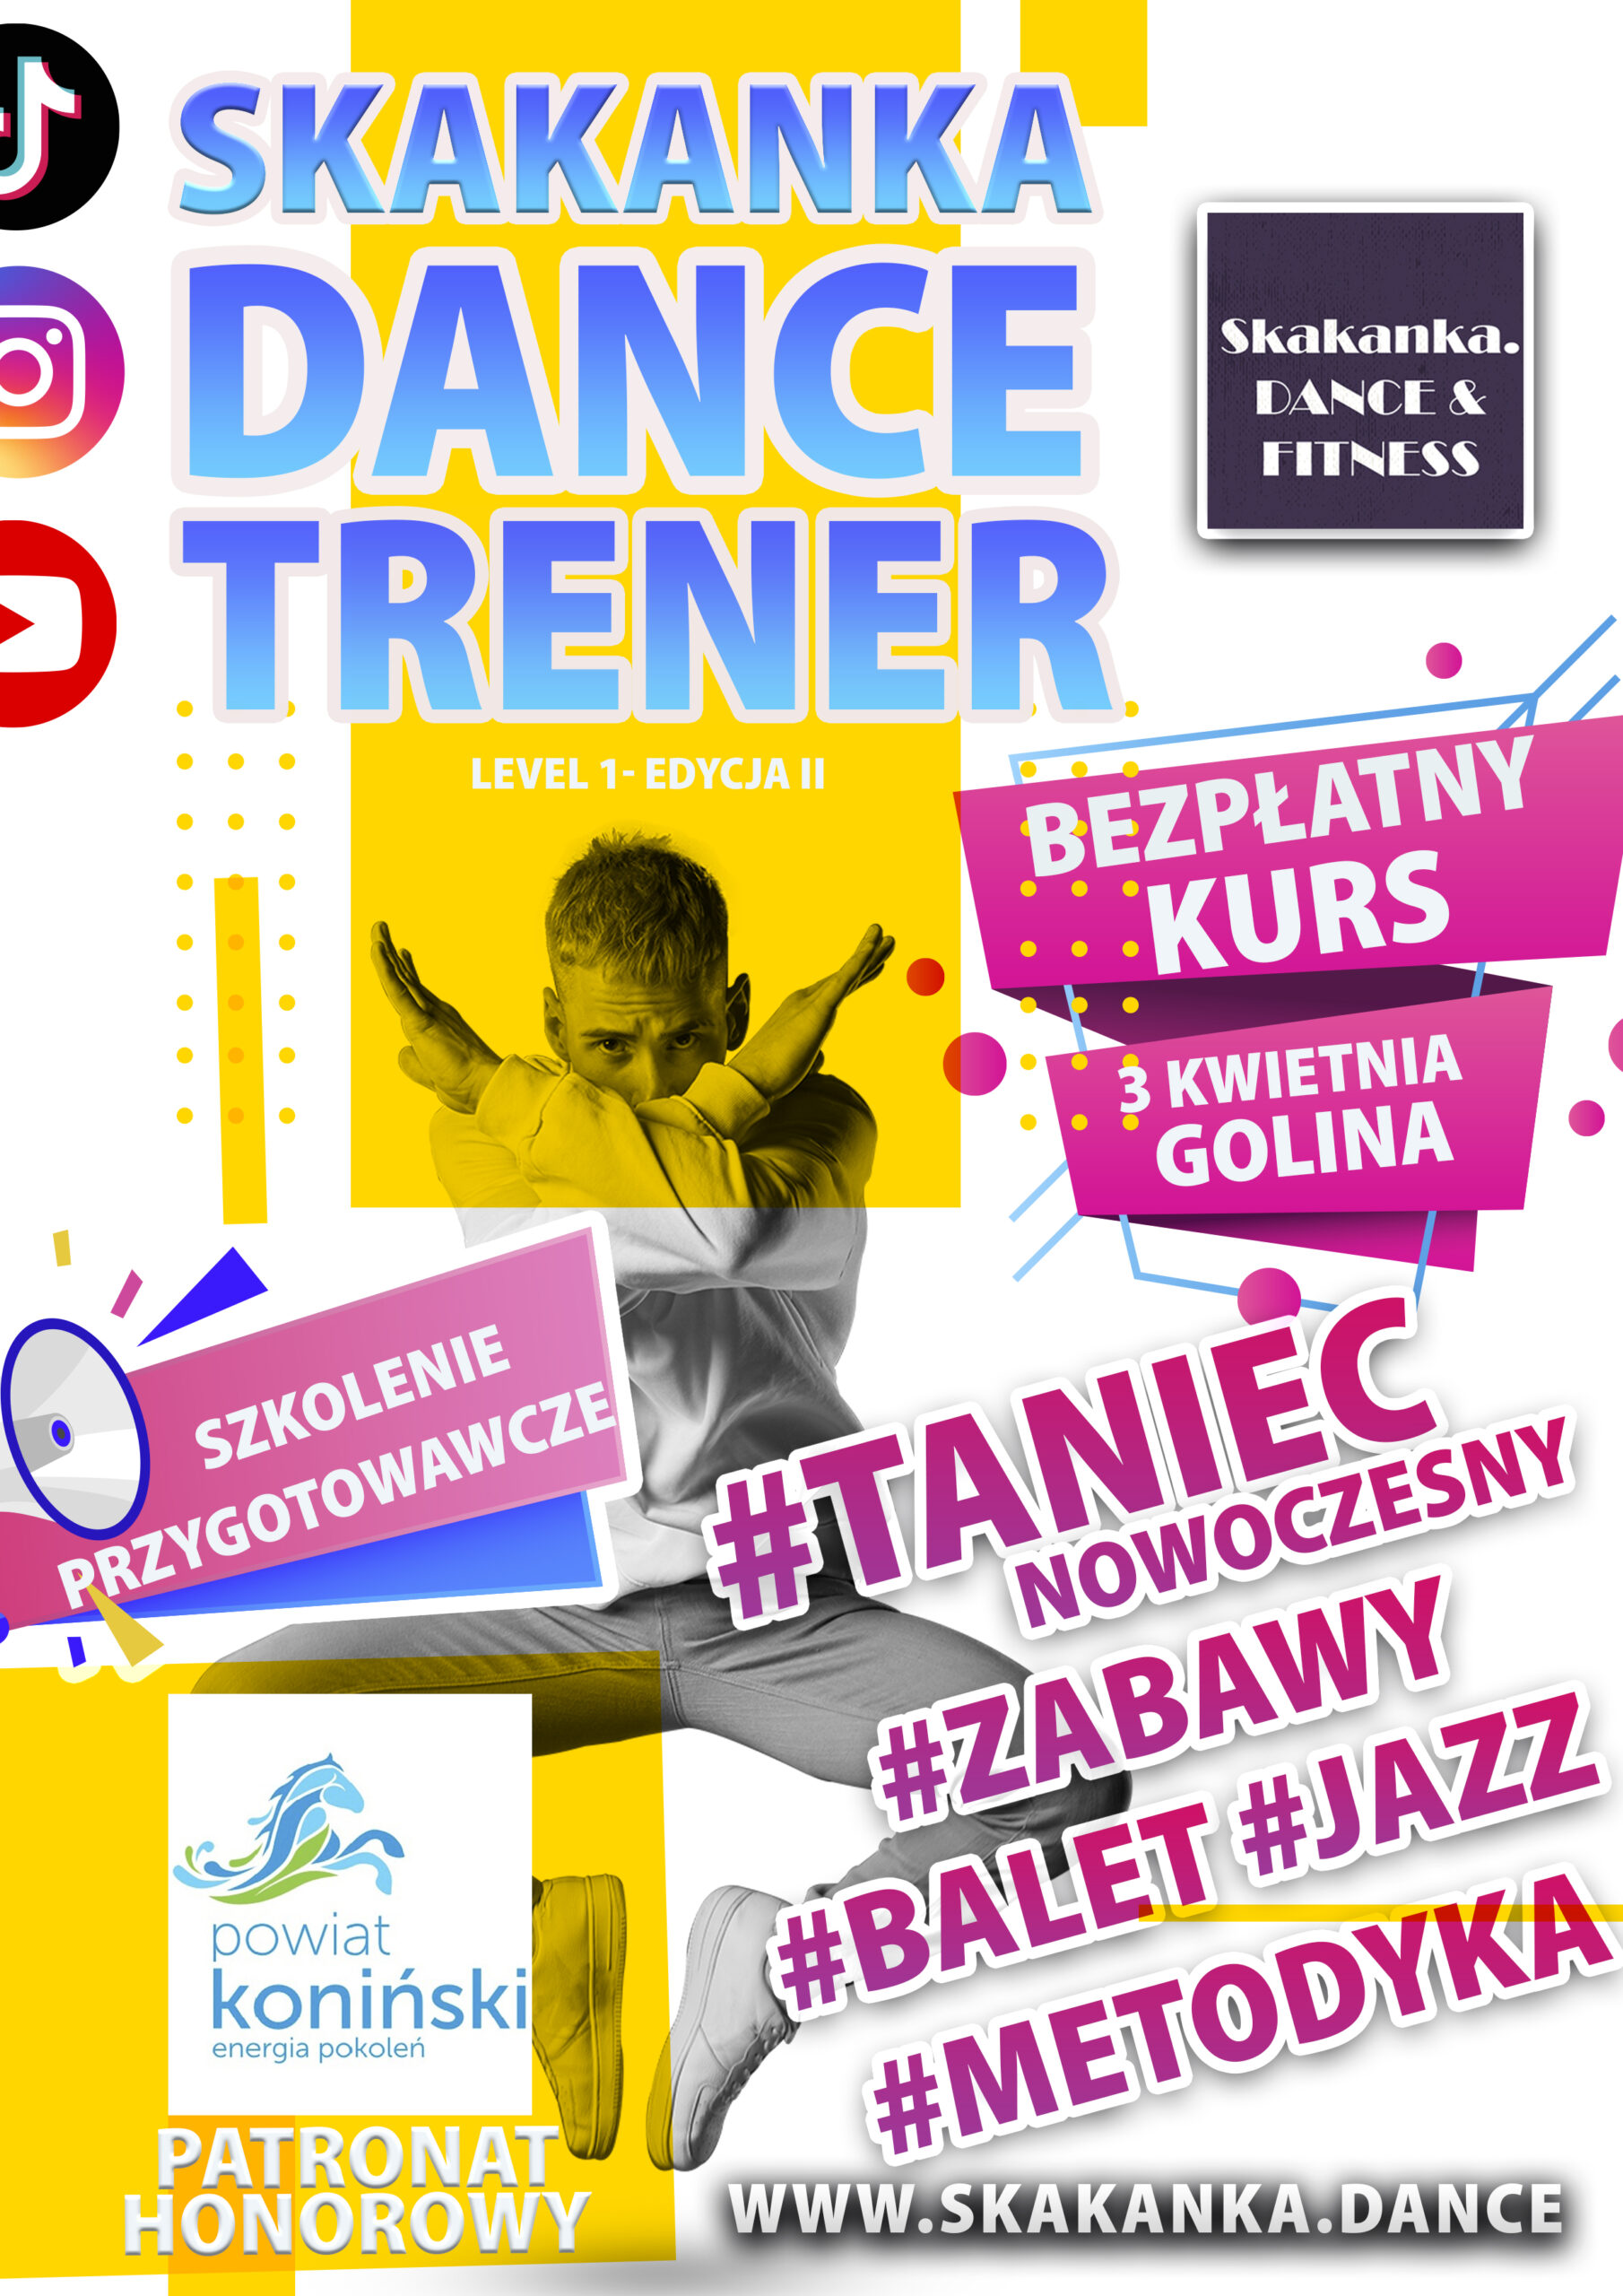 You are currently viewing Skakanka.DANCE – TRENER